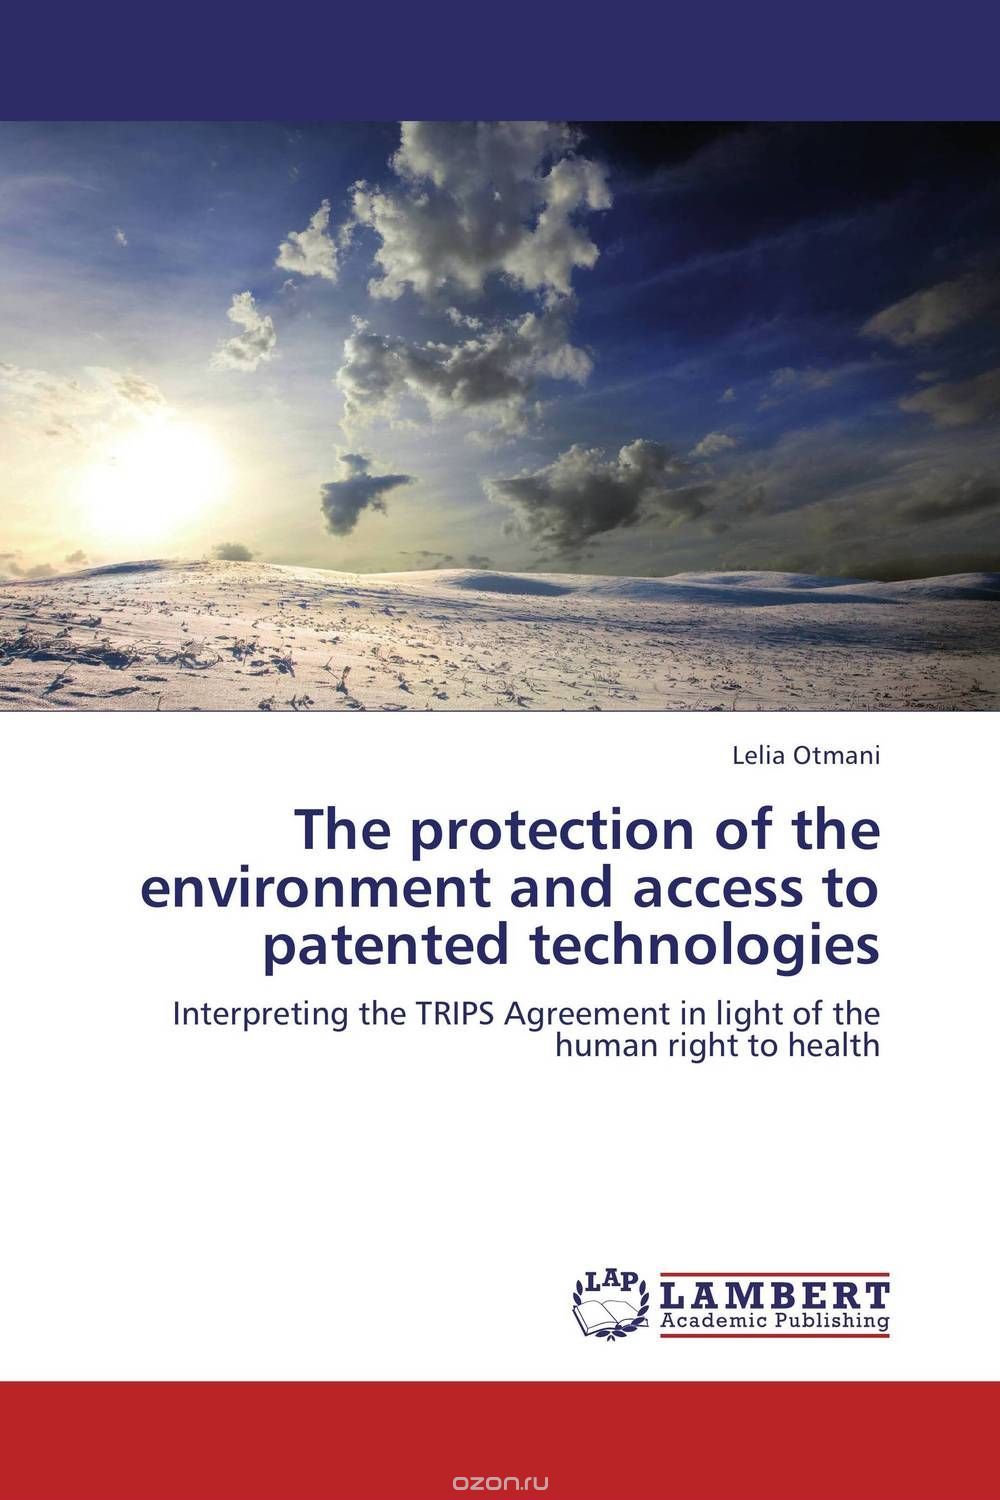 The protection of the environment and access to patented technologies